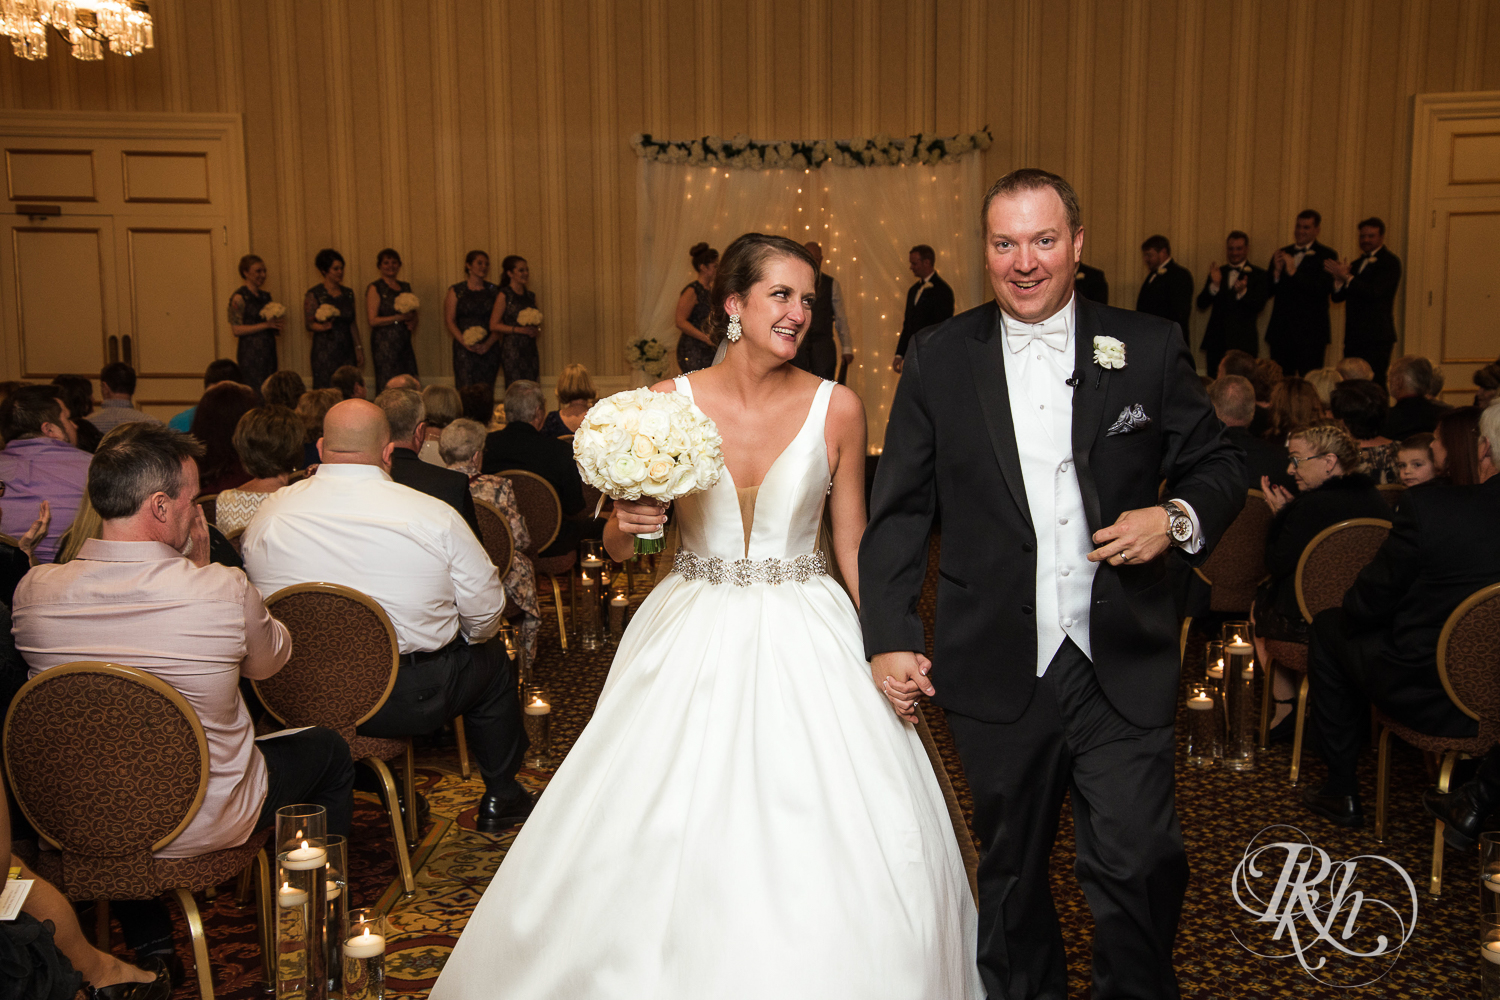 Bride and groom smile after wedding ceremony at The Saint Paul Hotel in Saint Paul, Minnesota.